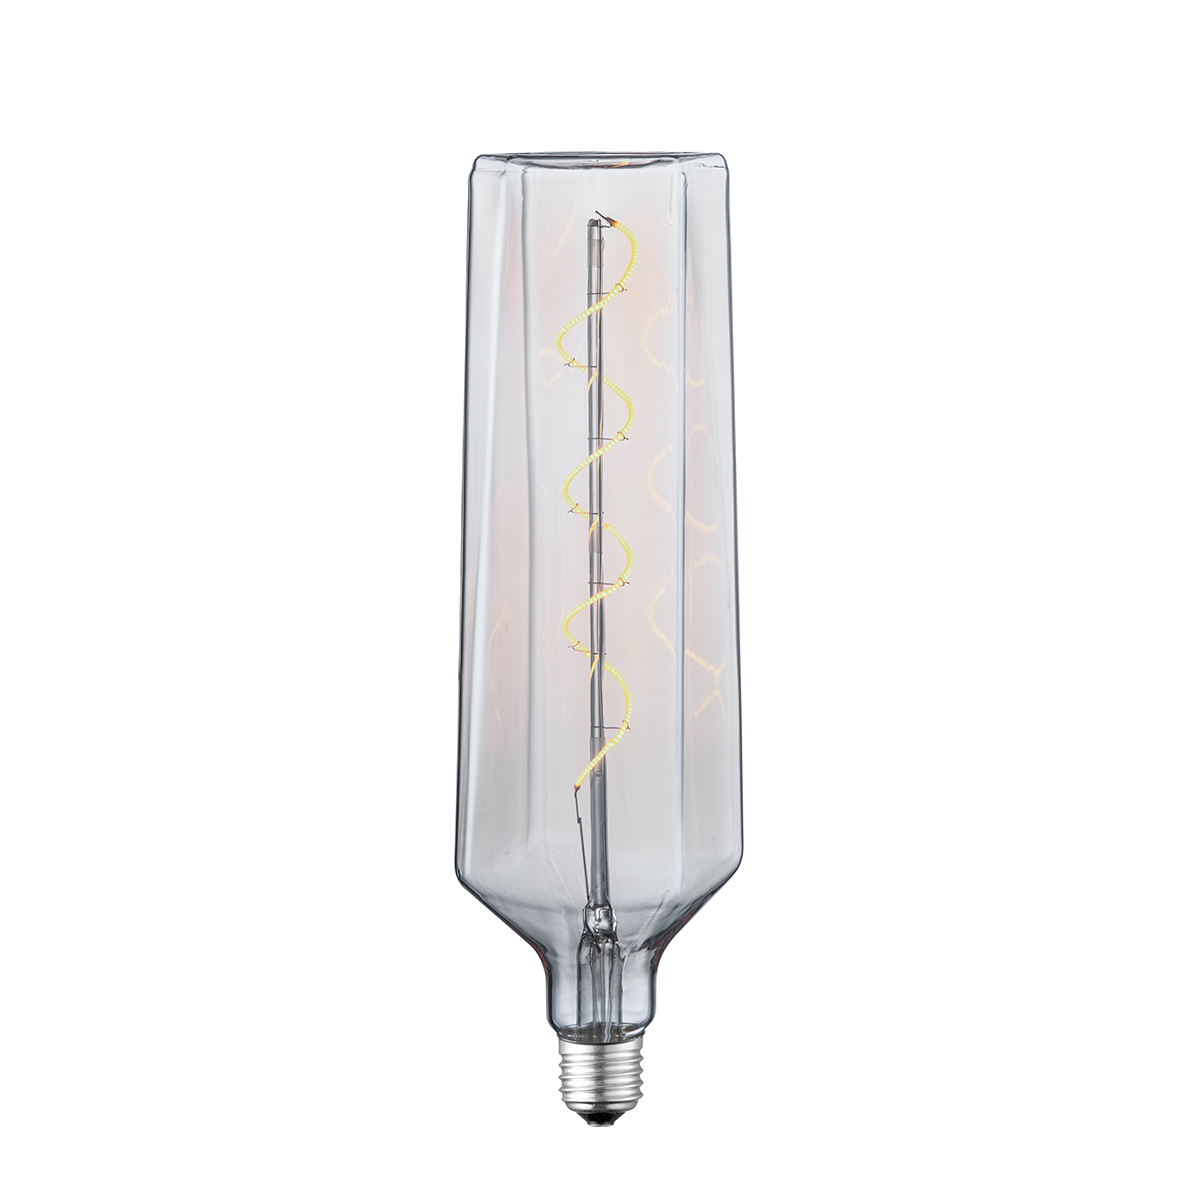 Tangla lighting - TLB-8109-04CL - LED Light Bulb Single Spiral filament - special 4W clear - popsicle - dimmable - E27